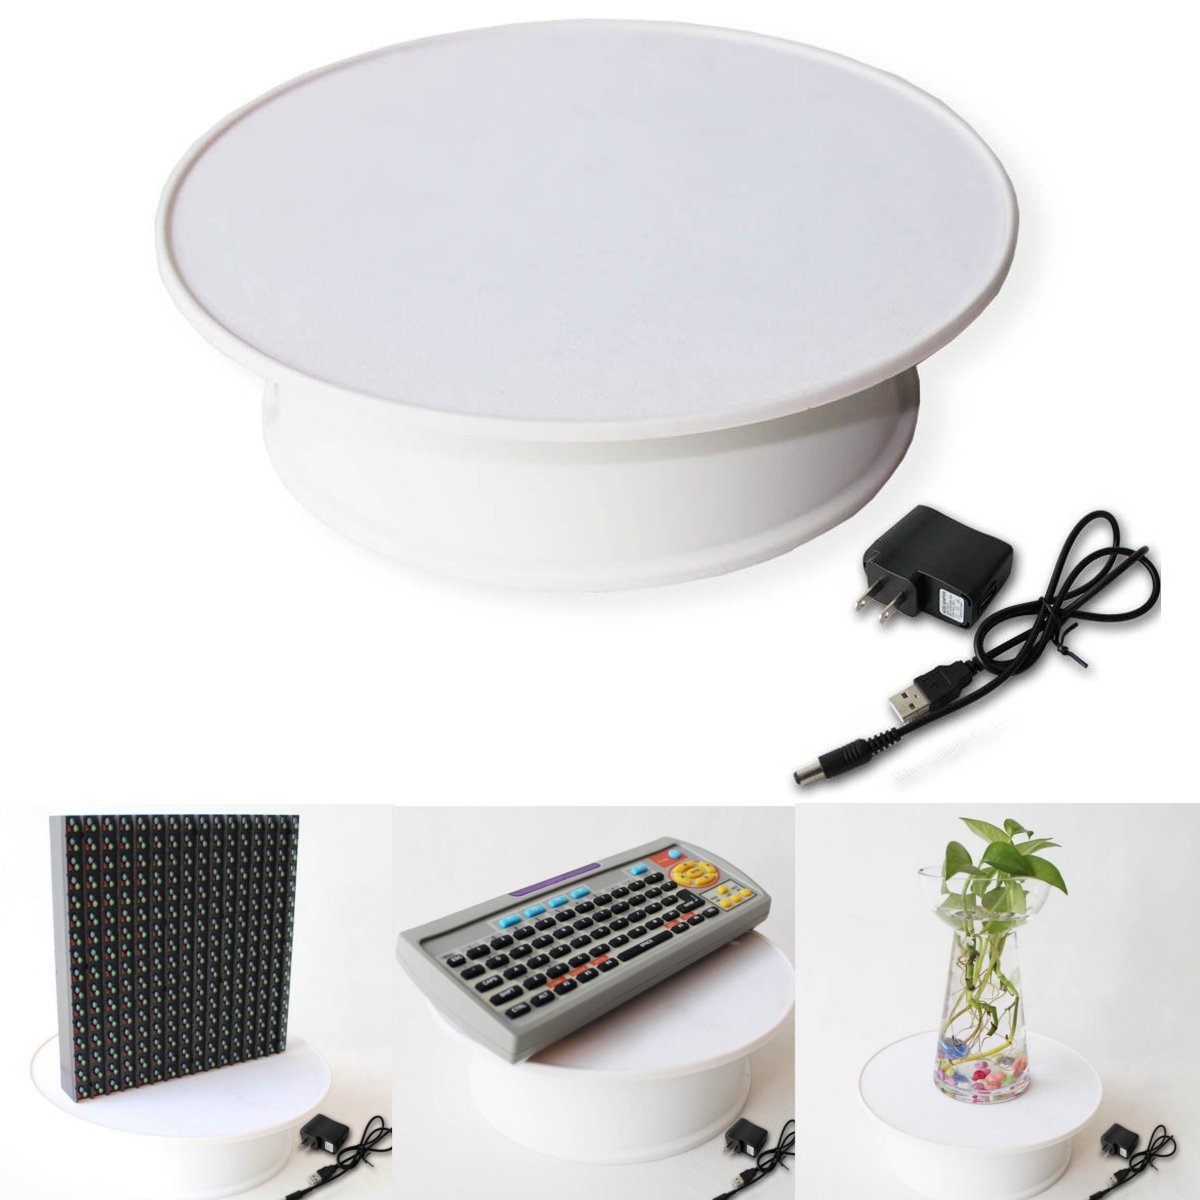 Round-White-Velvet-Top-Electric-Motorized-360deg-Rotating-Turntable-Jewelry-Ornament-Display-Stand-1374821